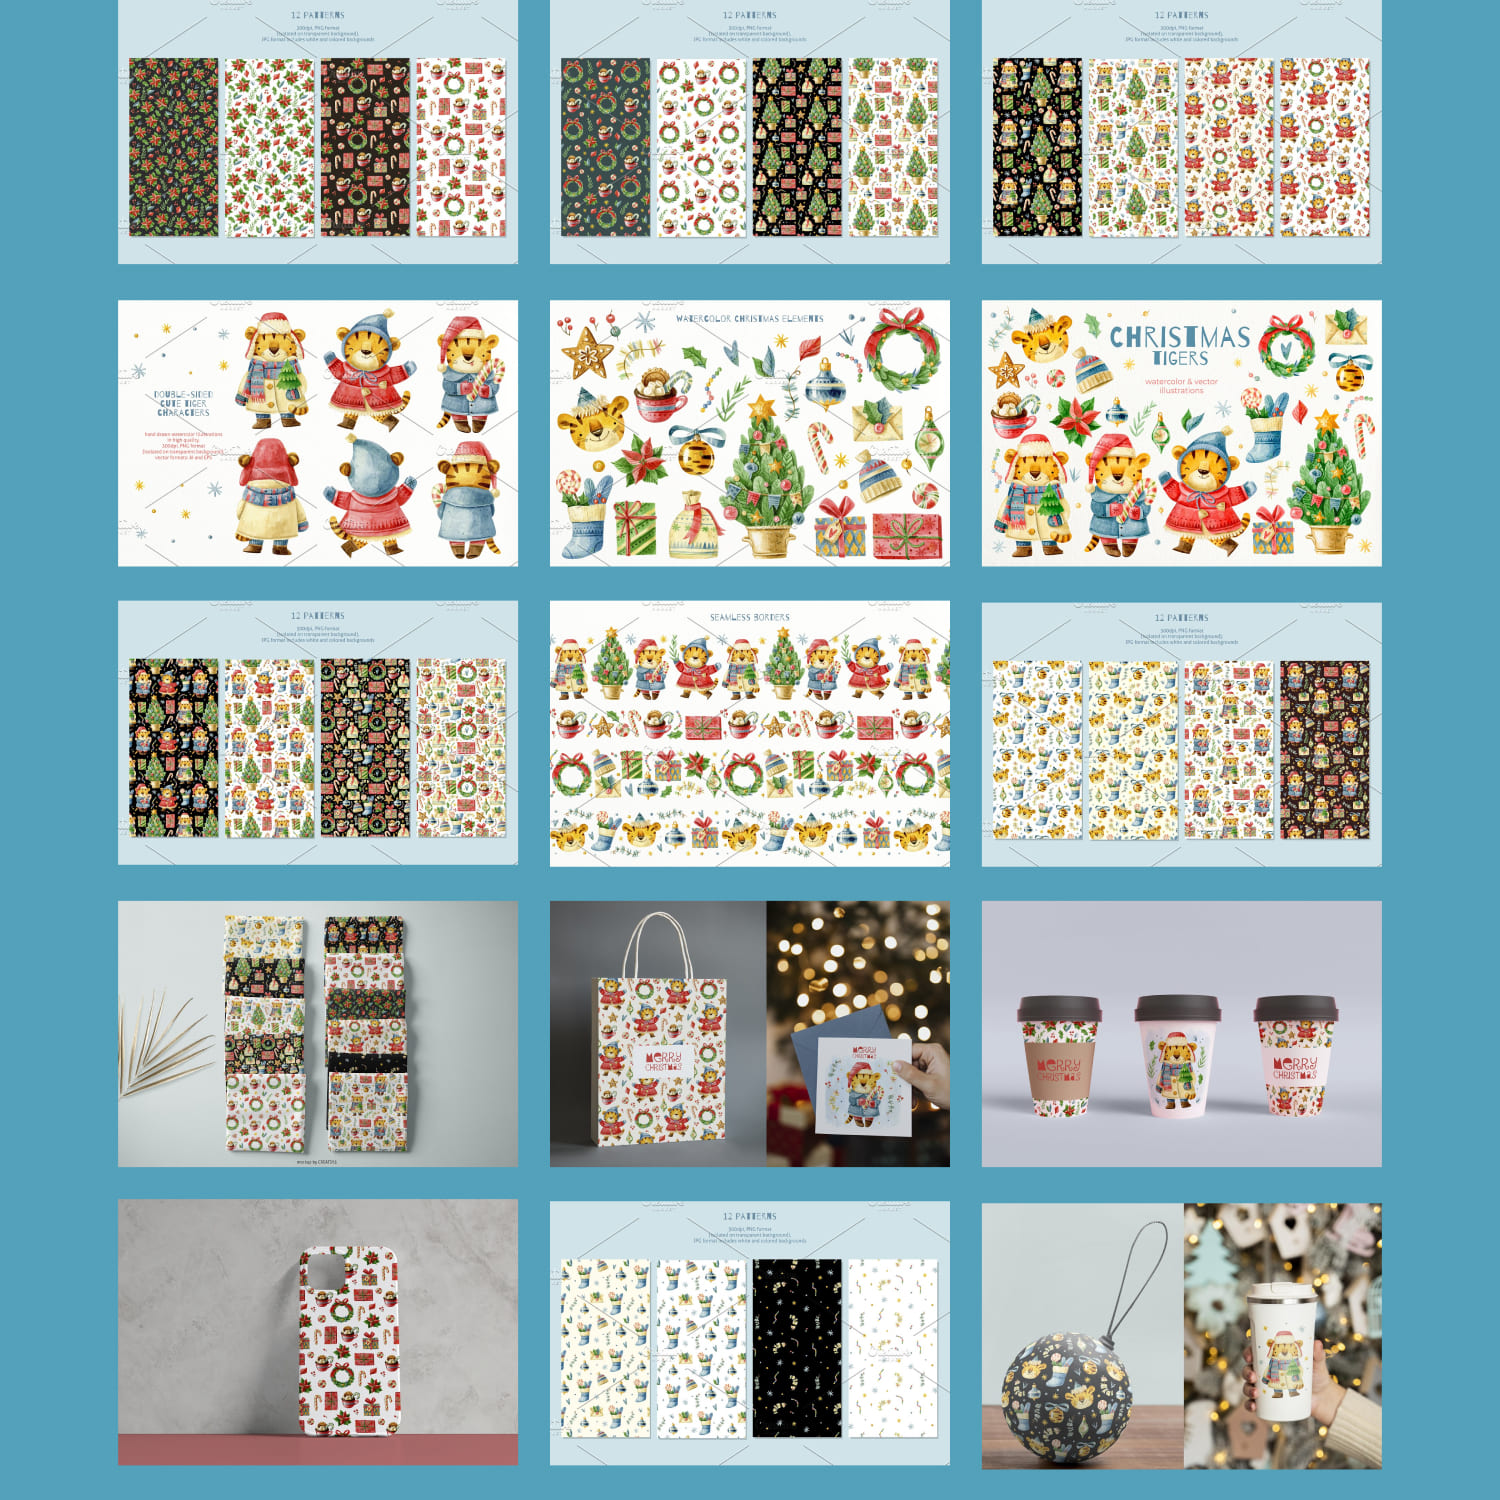 Christmas tigers. New Year cute set. cover.